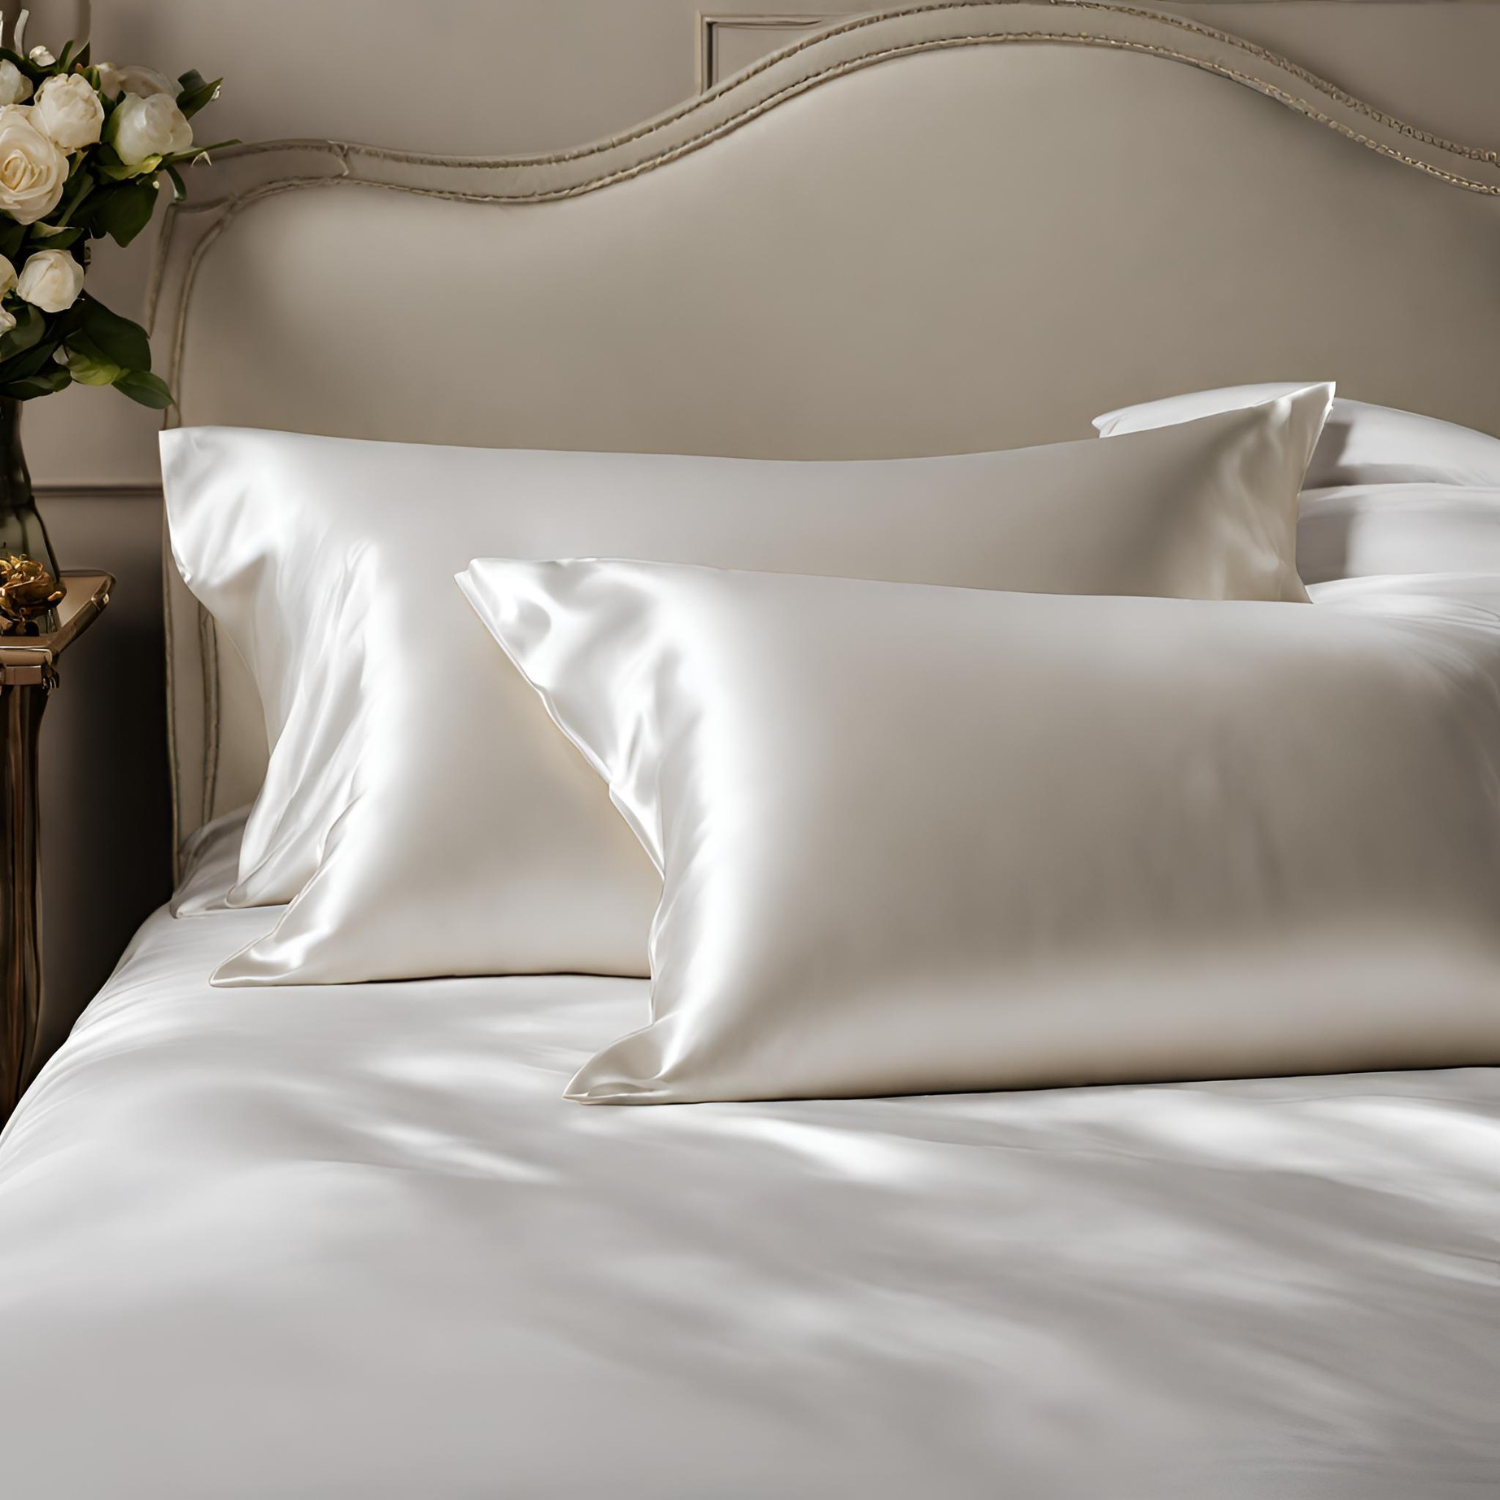 100% Mulberry Silk Performance Cooling Pillowcase